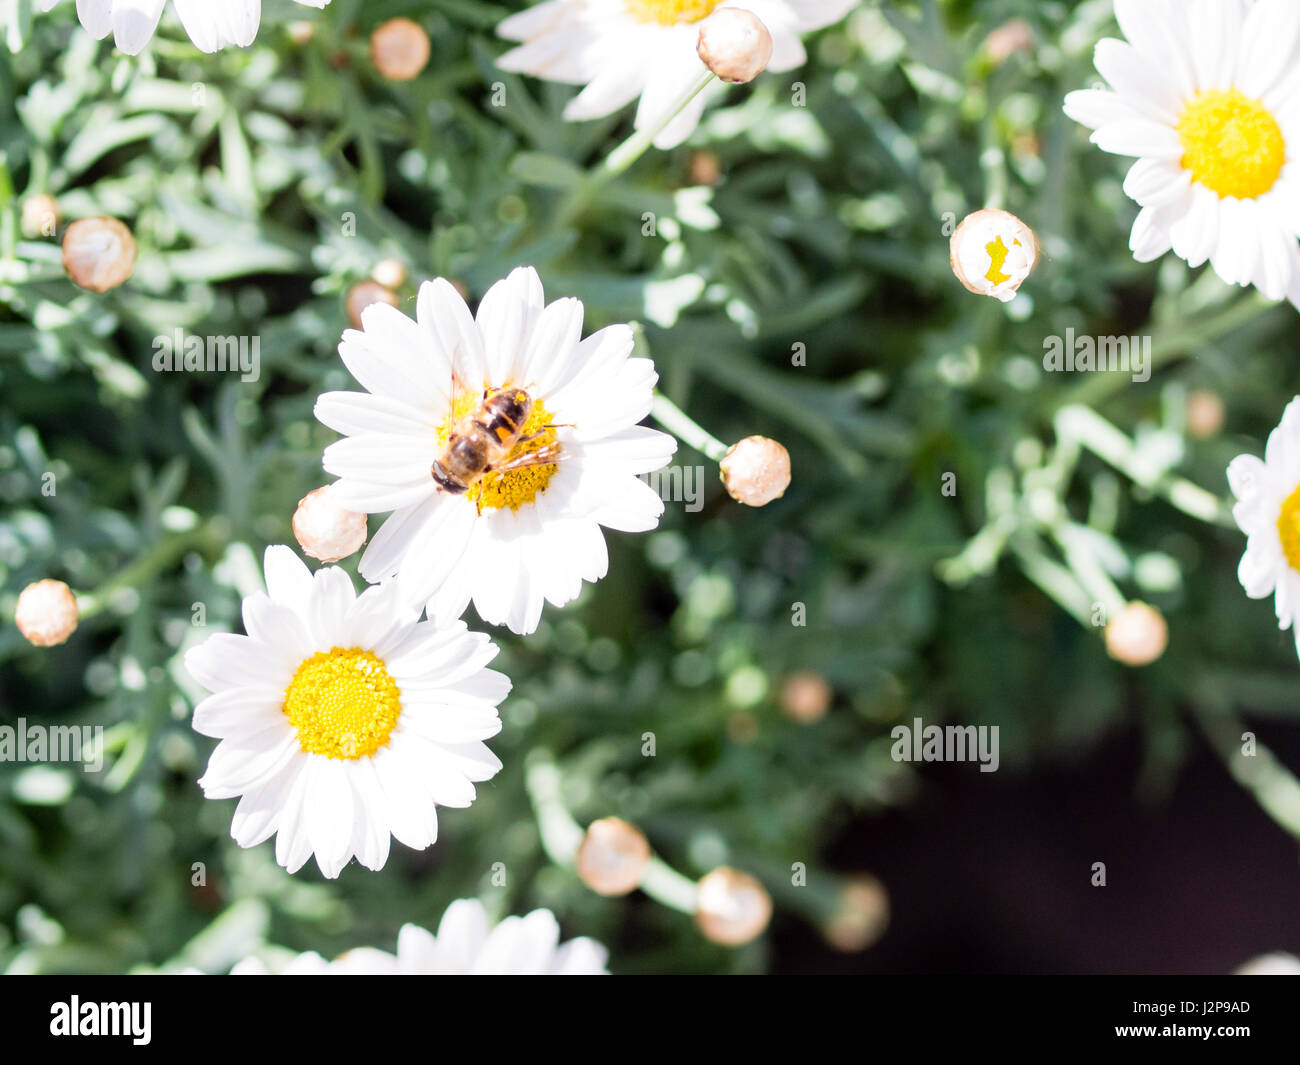 Bee at work takin pollen out of a daisy Stock Photo